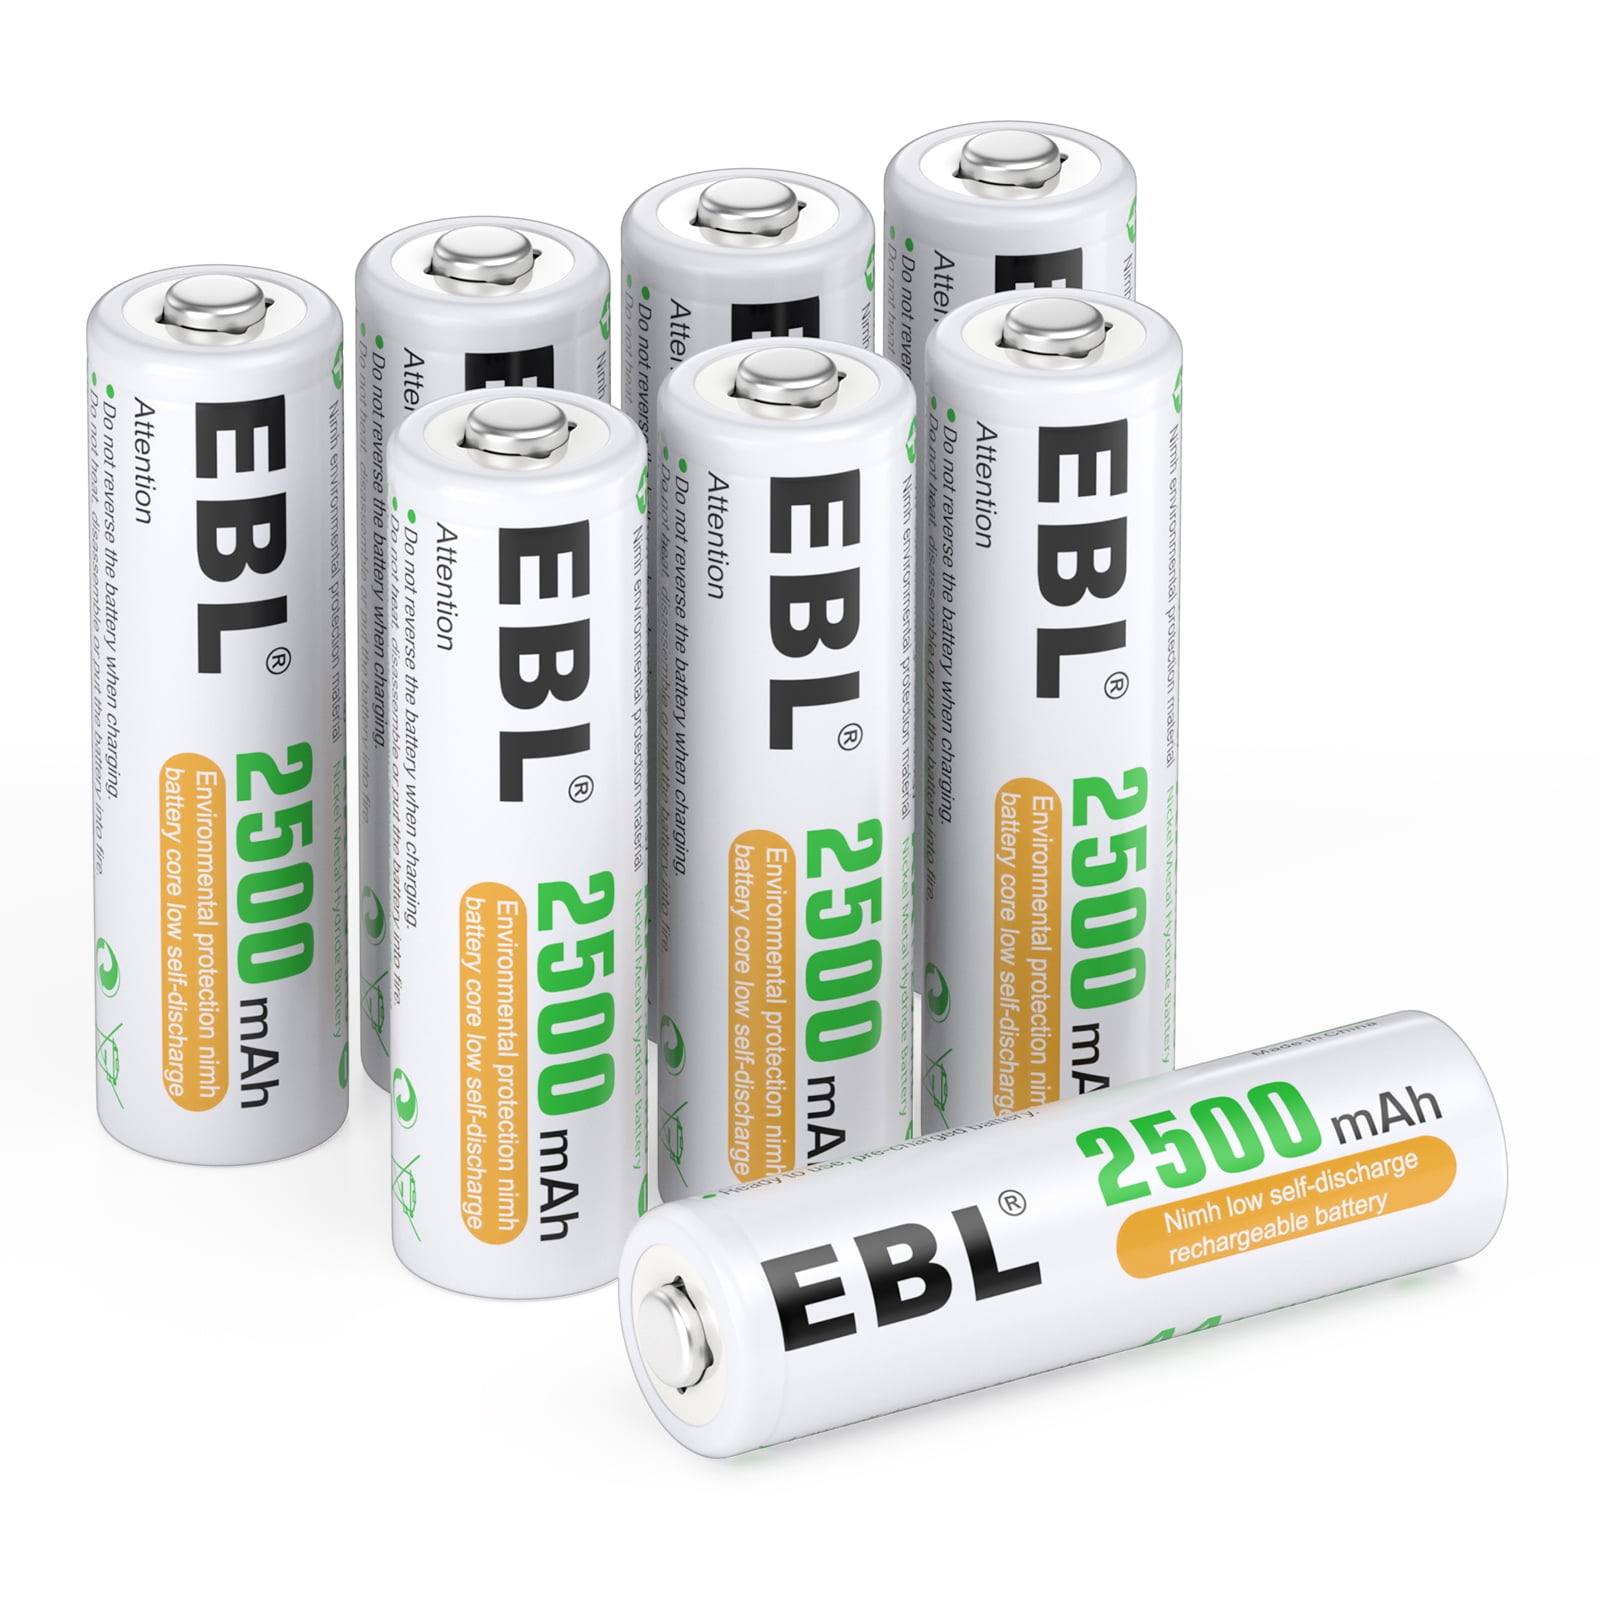 EBL Rechargeable AA Batteries (8 Pack) 1.2V 2500mAh High Performance  Pre-Charged Replace for Alkaline Batteries 